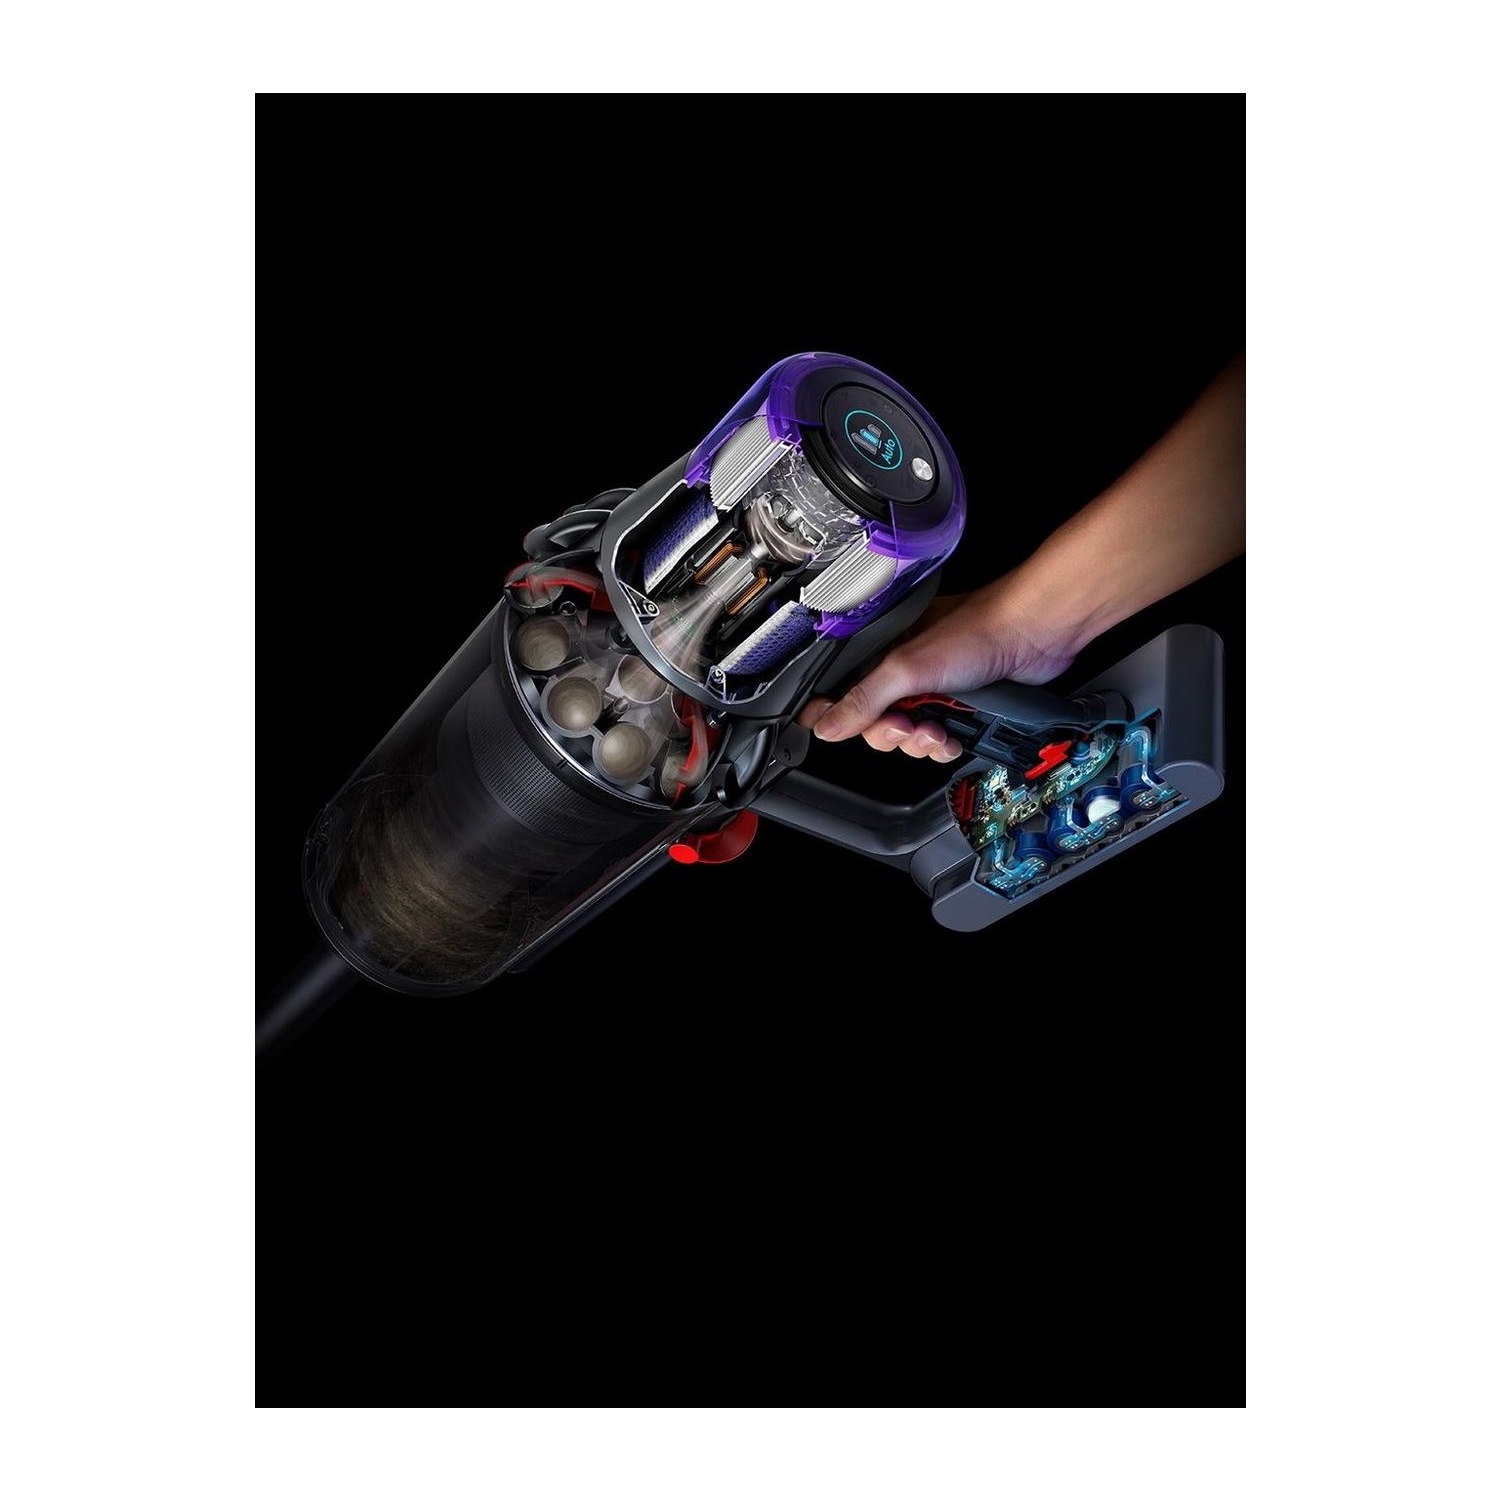 Dyson Outsize Absolute Cordless Vaccuum Cleaner - 120 Minutes Run Time - 9